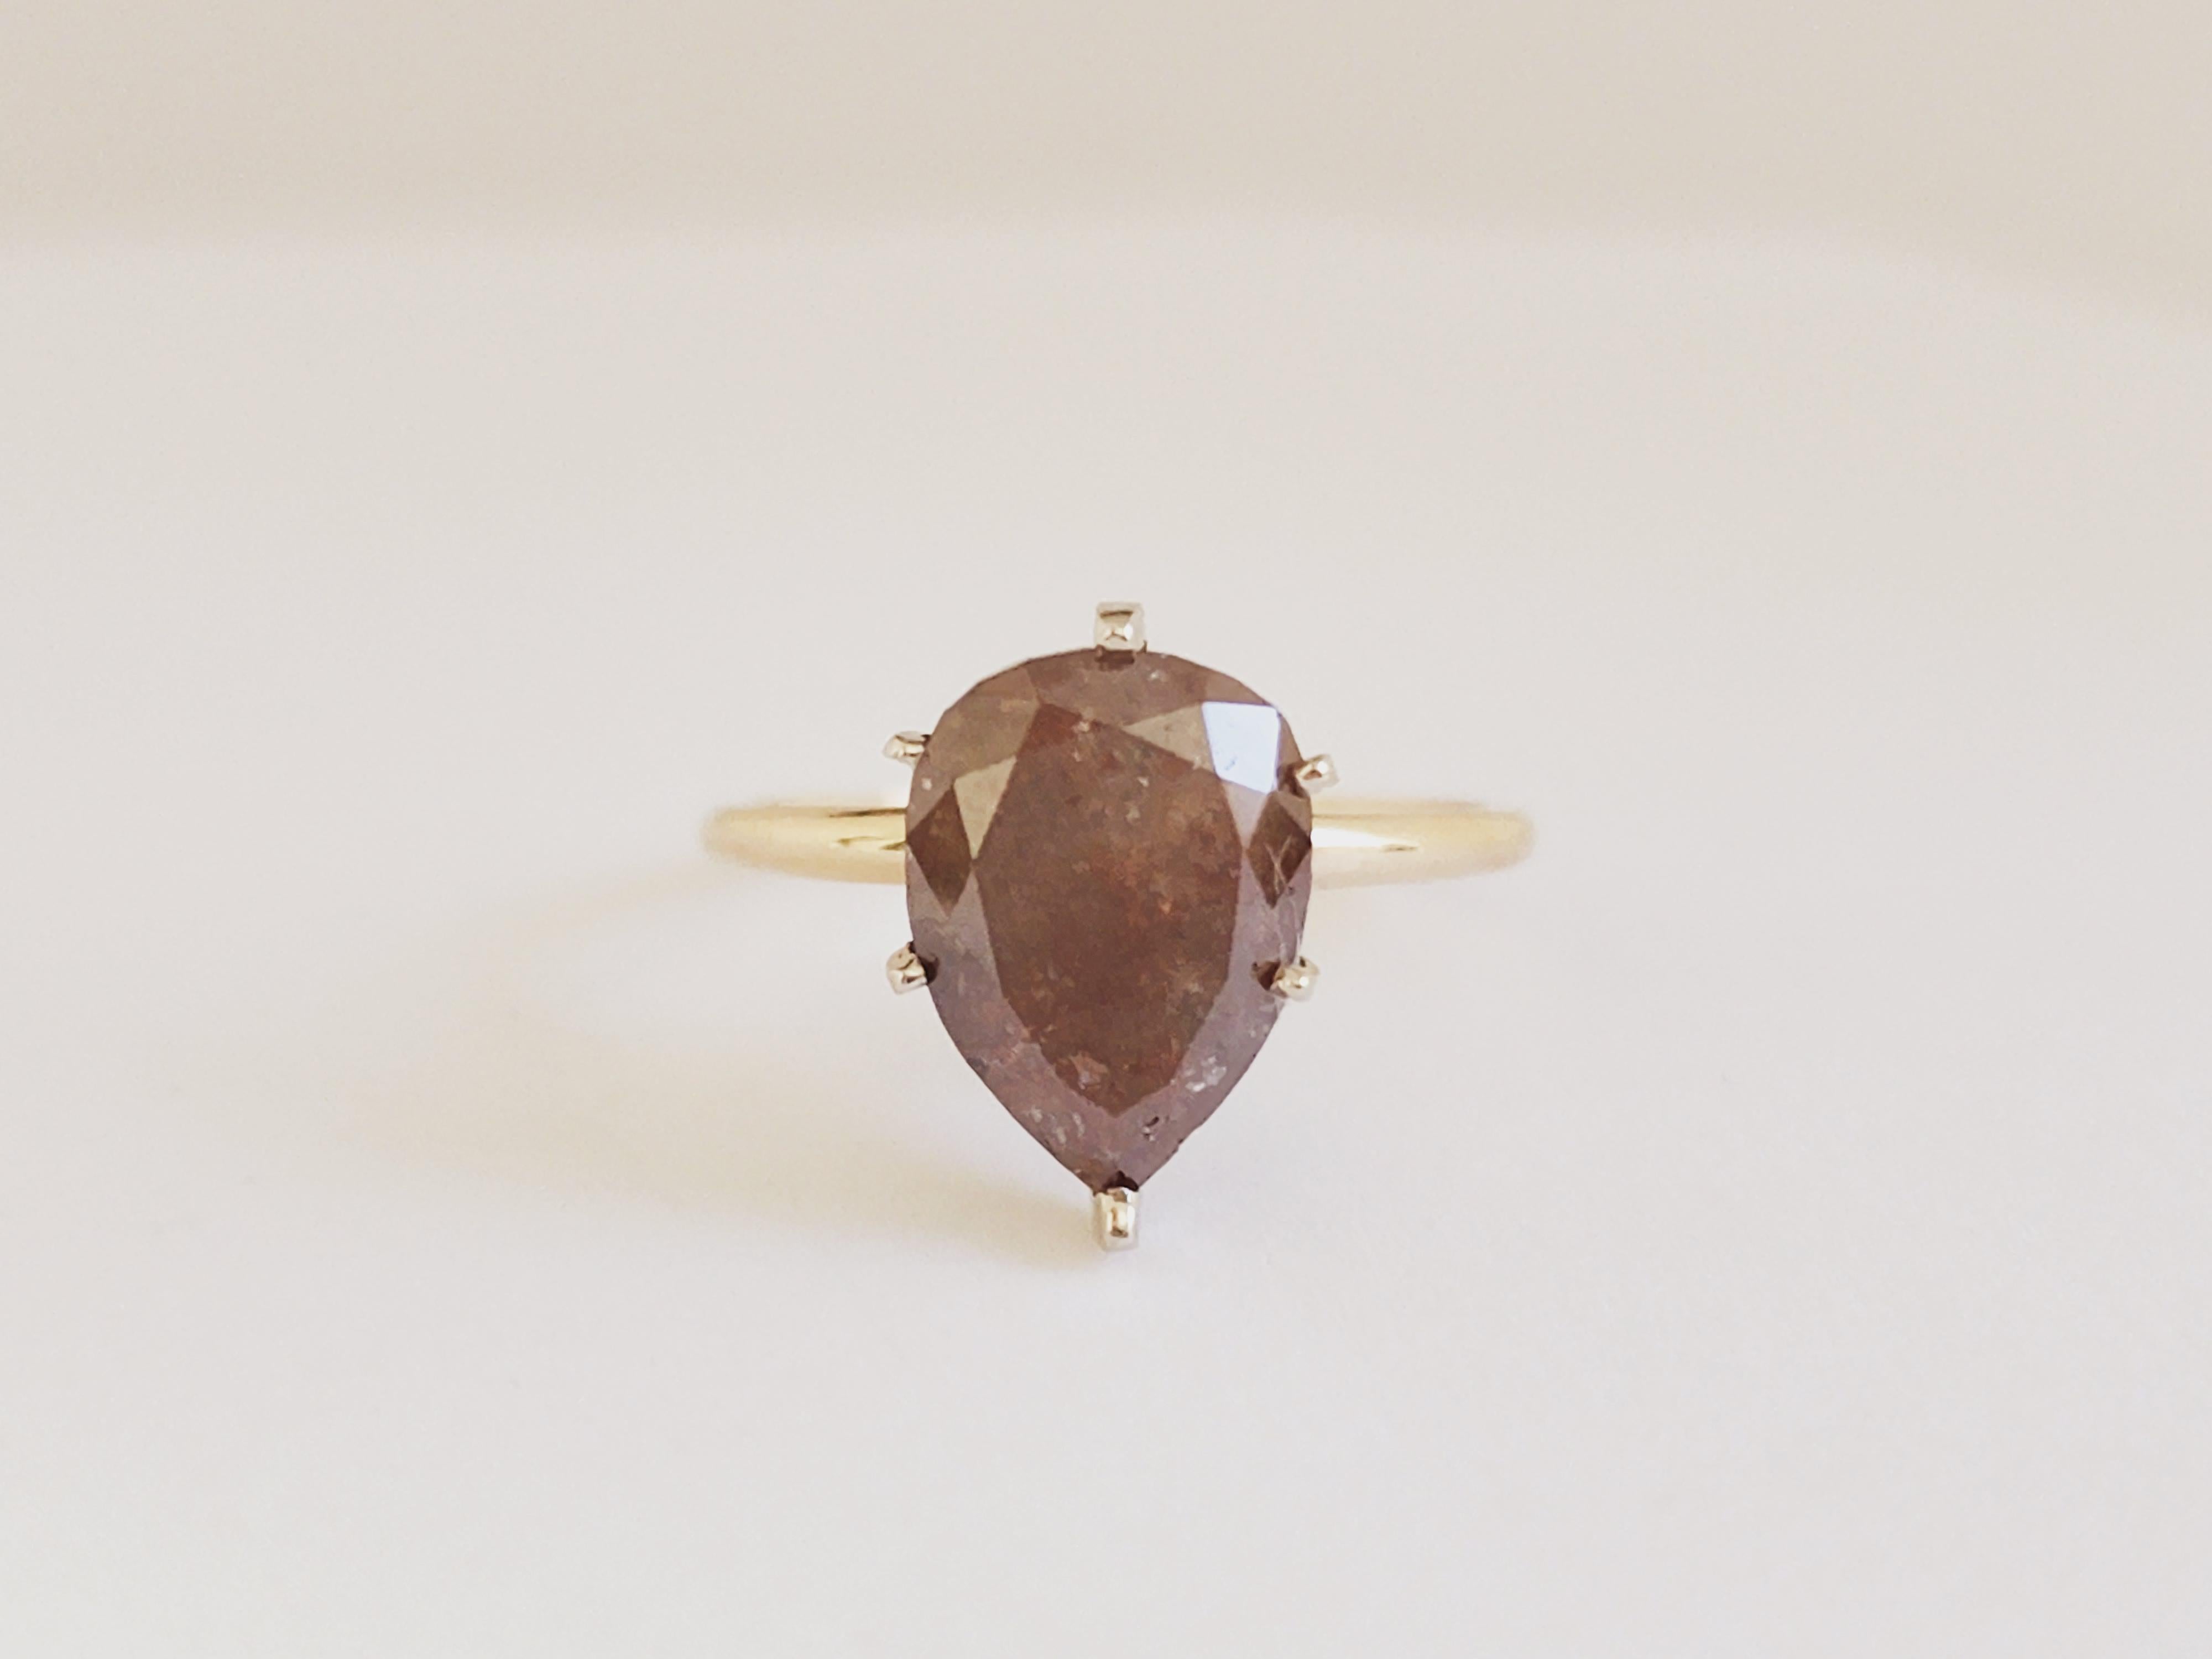 IGI Pear Shape Brown Diamond Weighs 3.89 Carats. 
Ring size 6.75 can be resize.
Color: Natural Brown